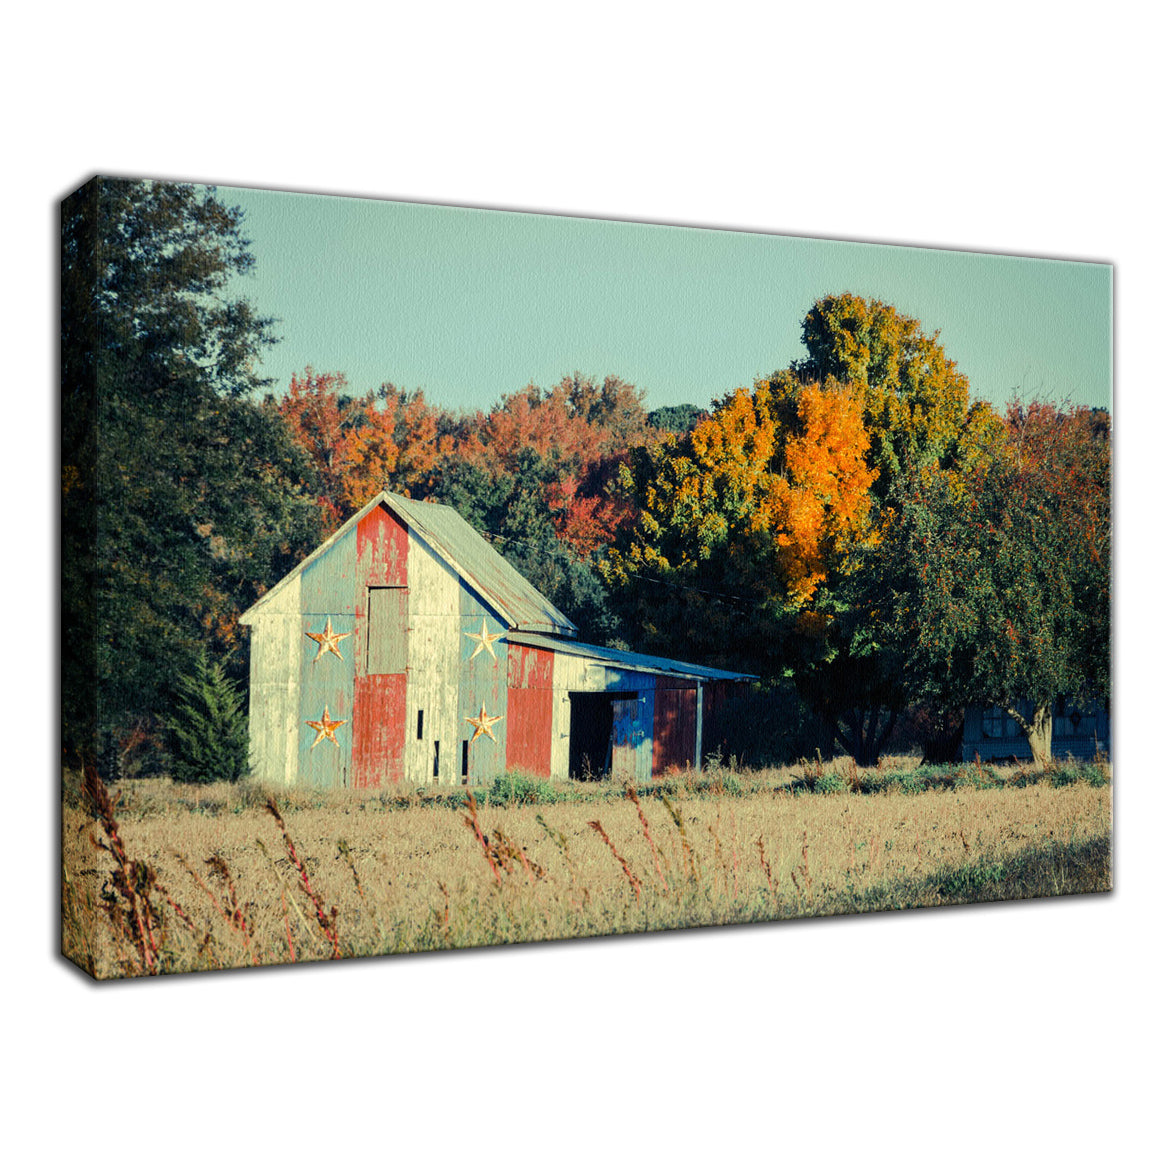 Patriotic Weathered Barn in Field Cross Processed Fine Art Canvas Wall Art Prints  - PIPAFINEART